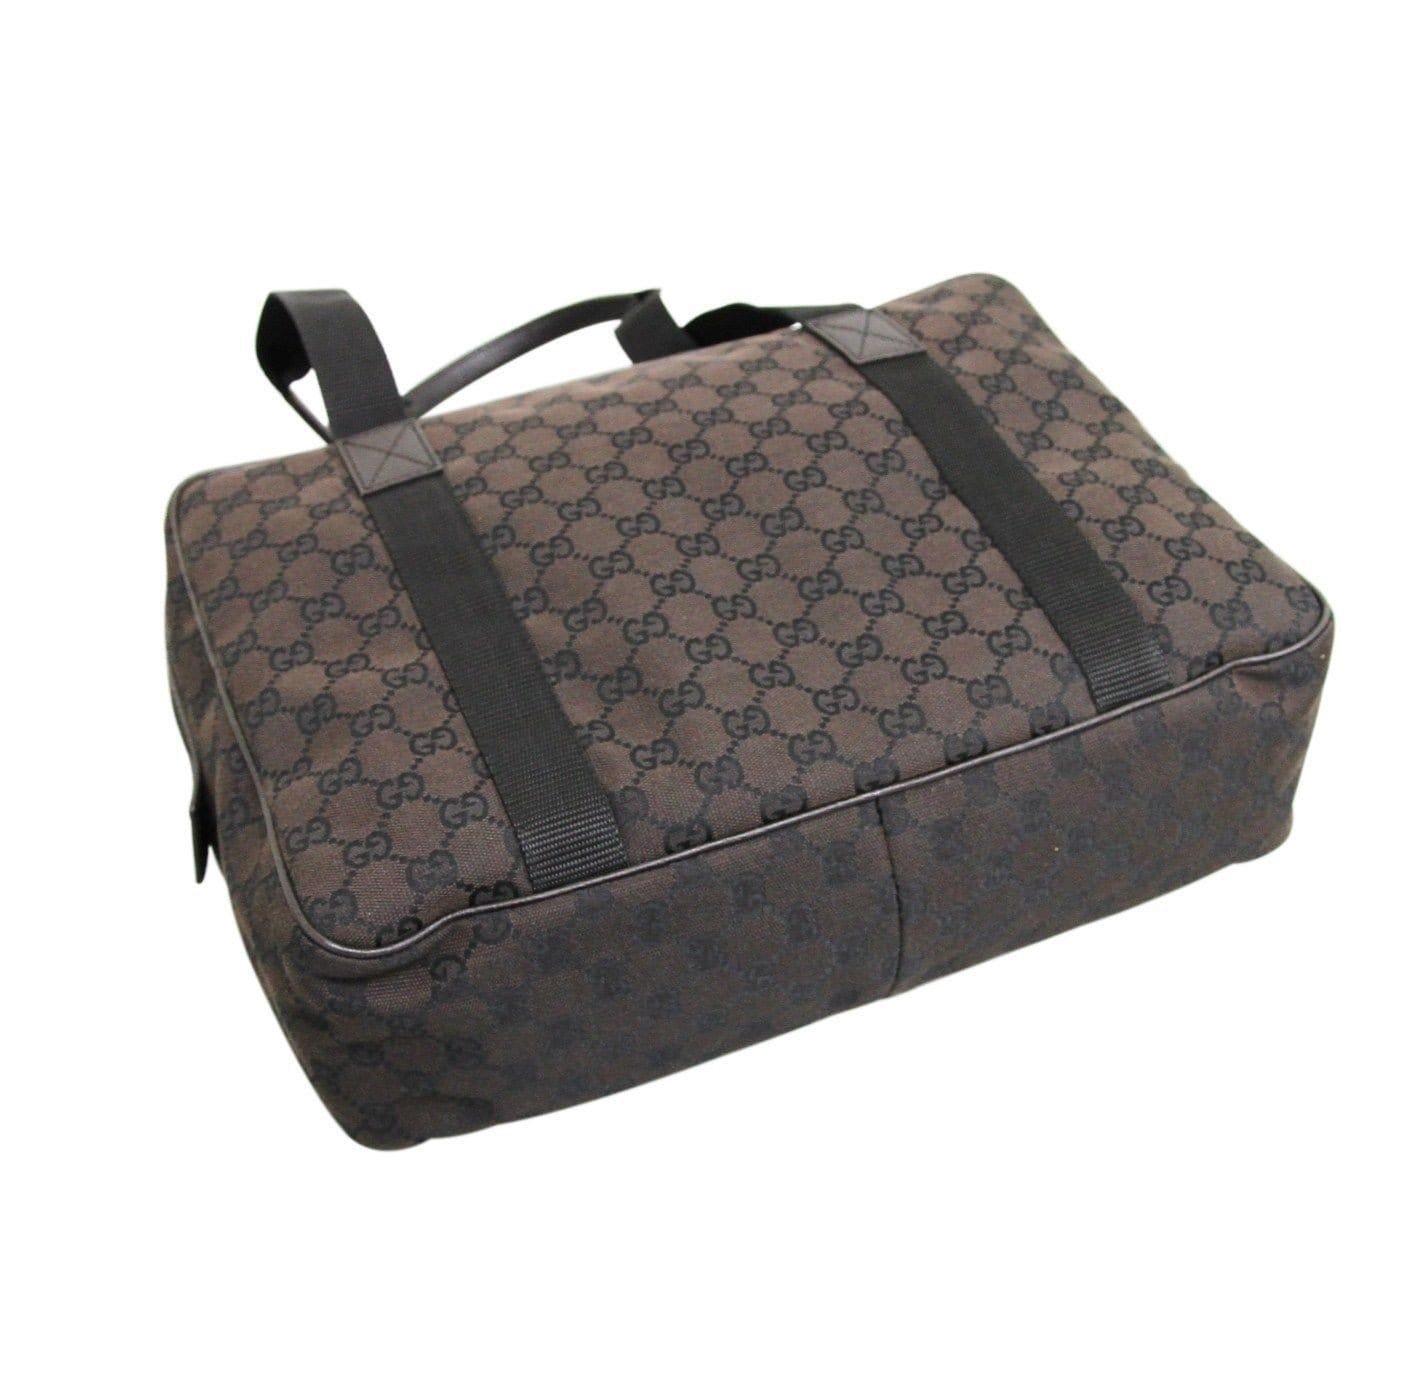 Laptop Bags and Totes - Designer Laptop Bags and Totes